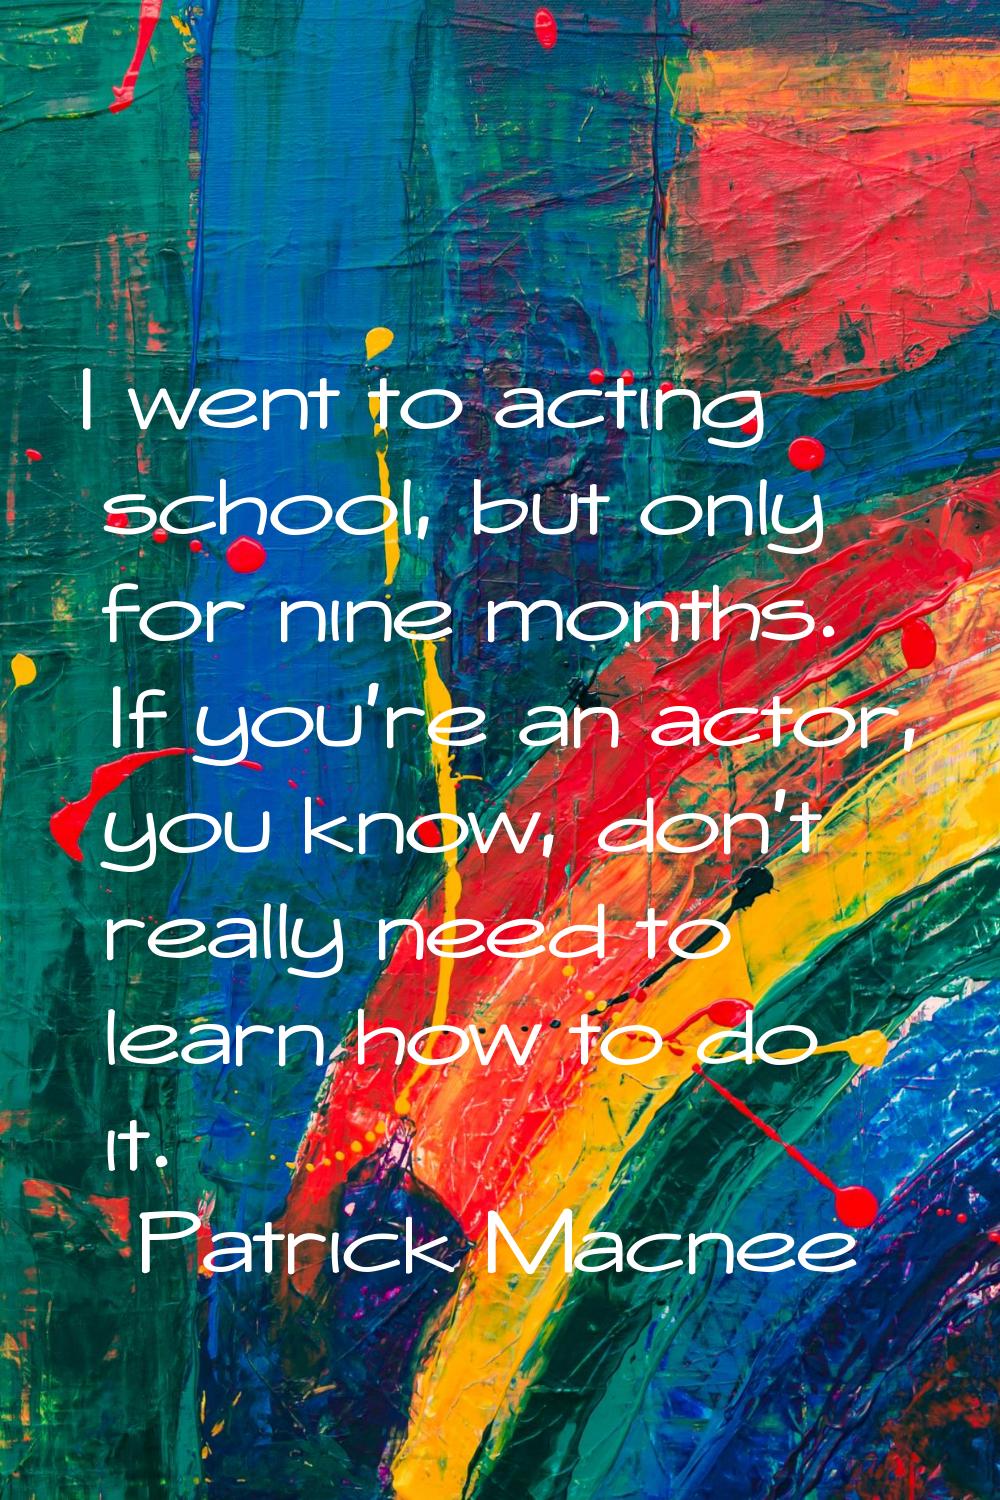 I went to acting school, but only for nine months. If you're an actor, you know, don't really need 